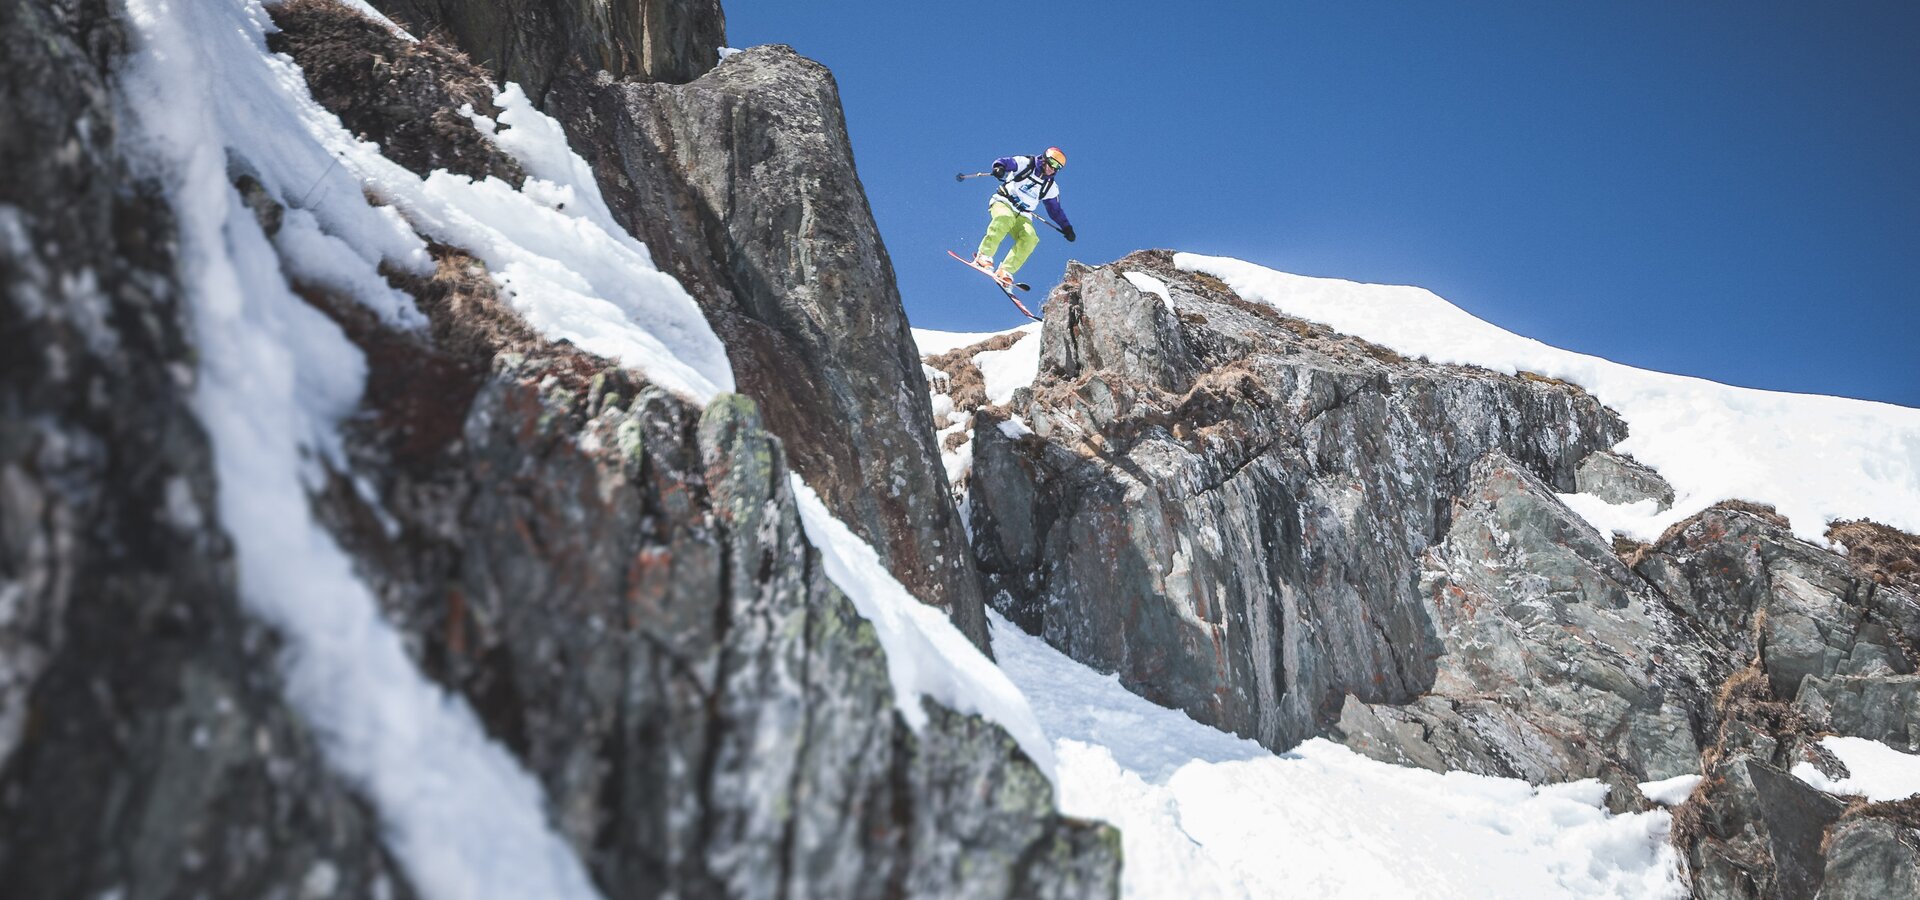 3* qualifier competition for valuable scores in the Freeride World Tour: Spectacular jumps and runs from international freeriders | © Kitzsteinhorn